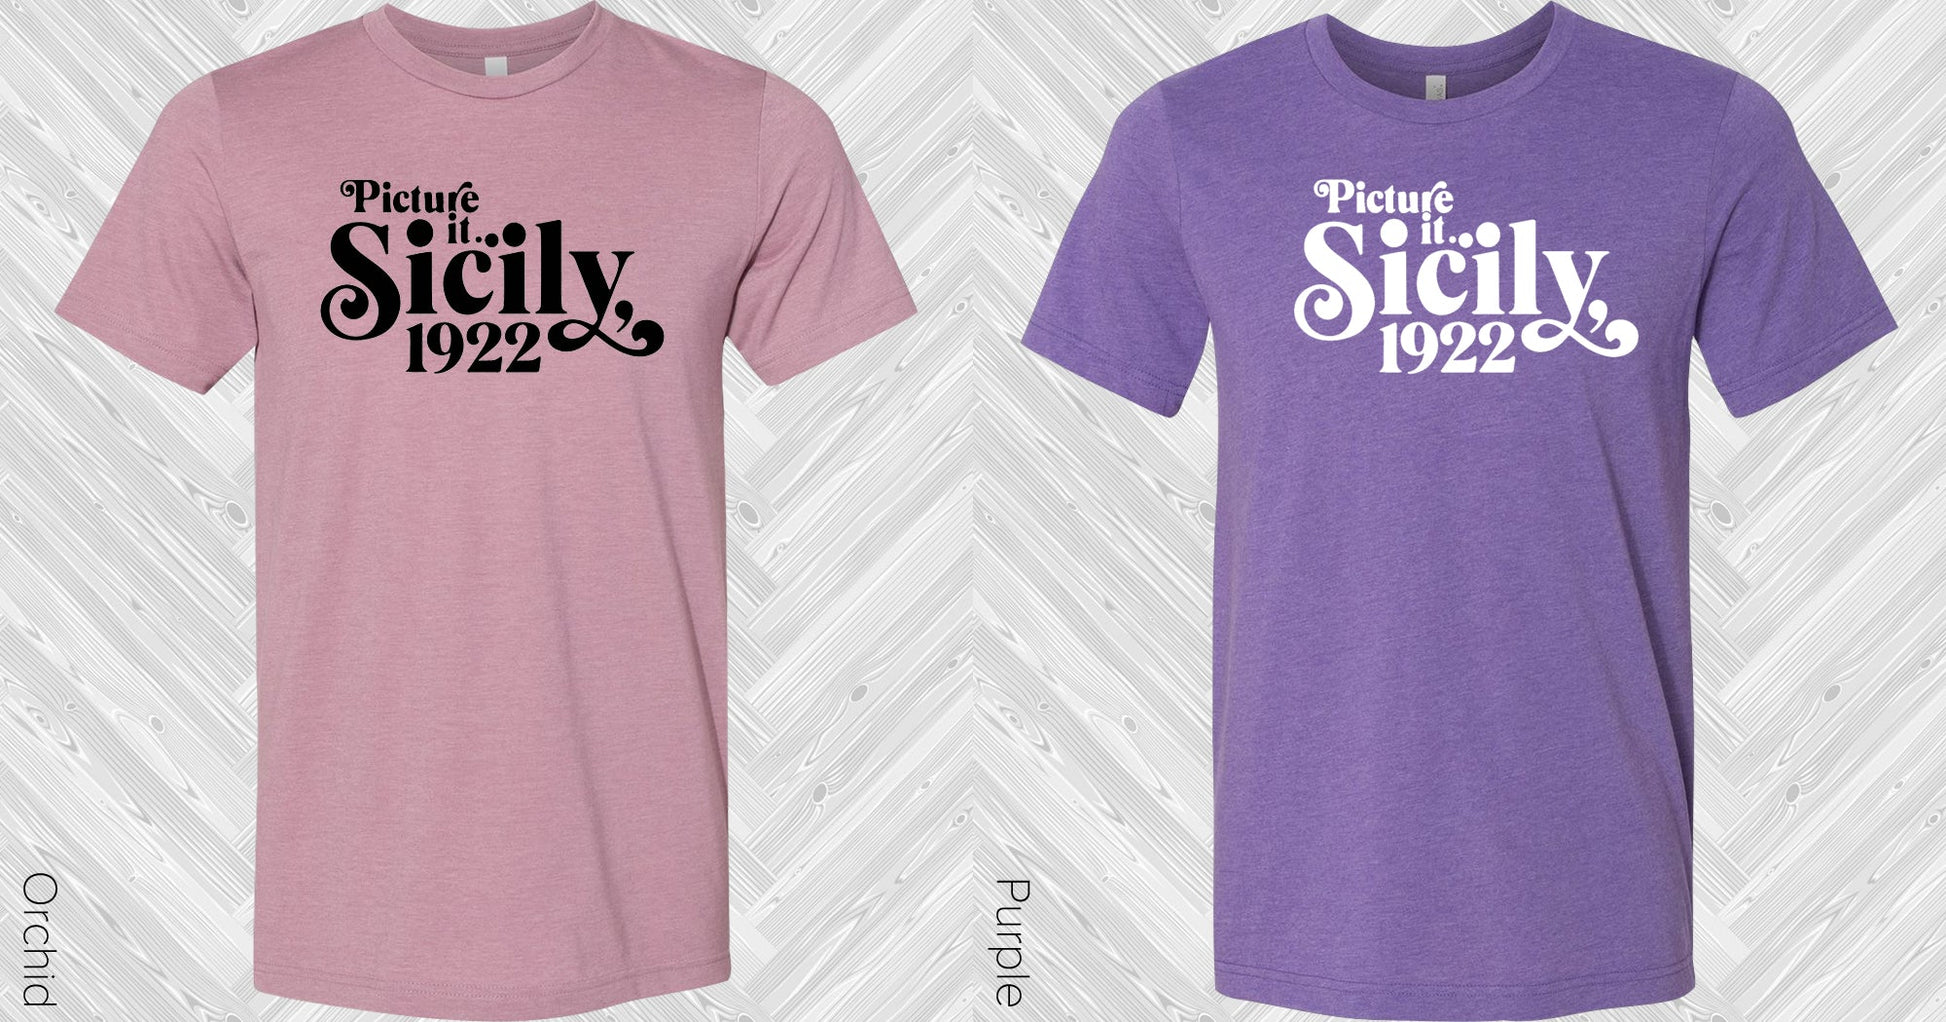 Picture It Sicily 1922 Graphic Tee Graphic Tee